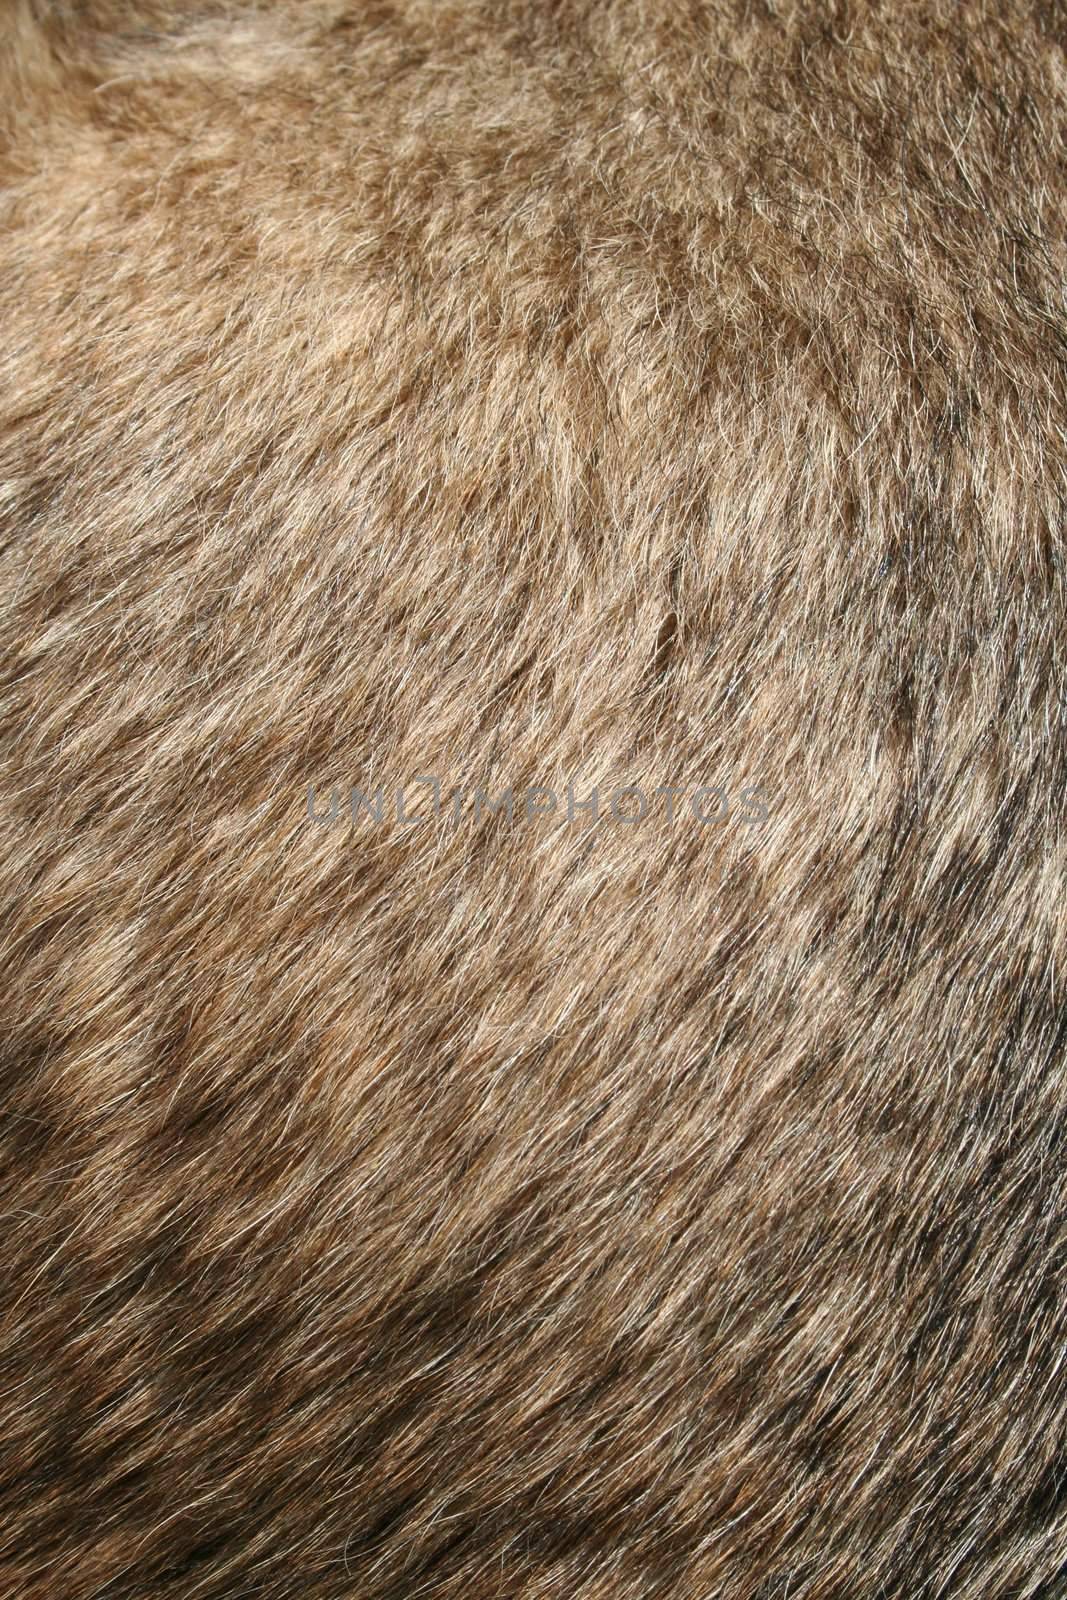 Dogs Fur by Spectral